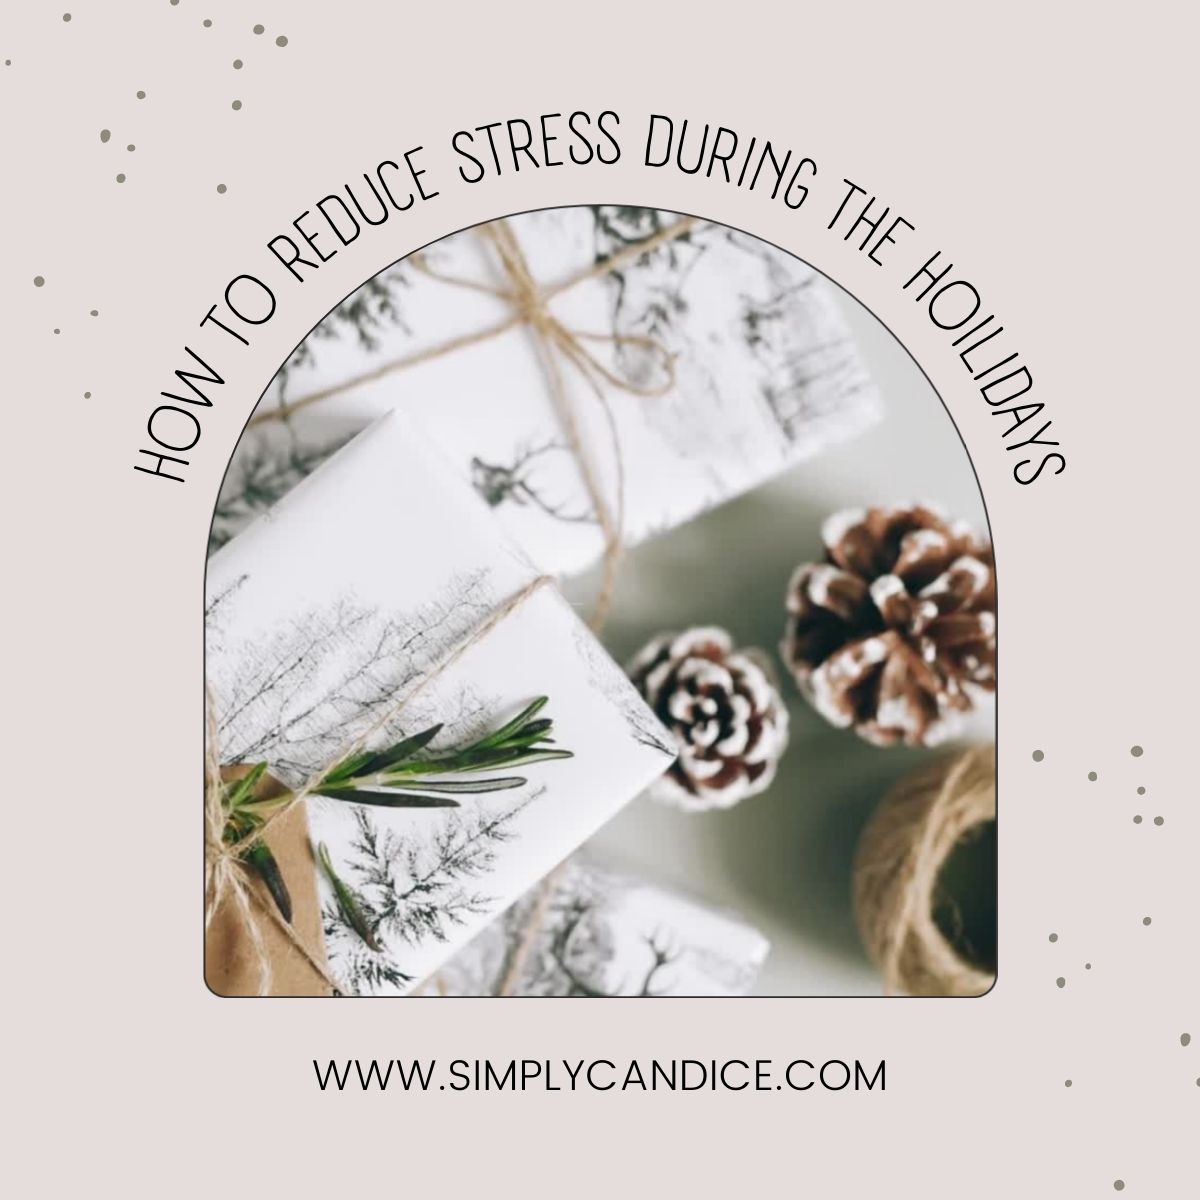 reduce stress during the holidays